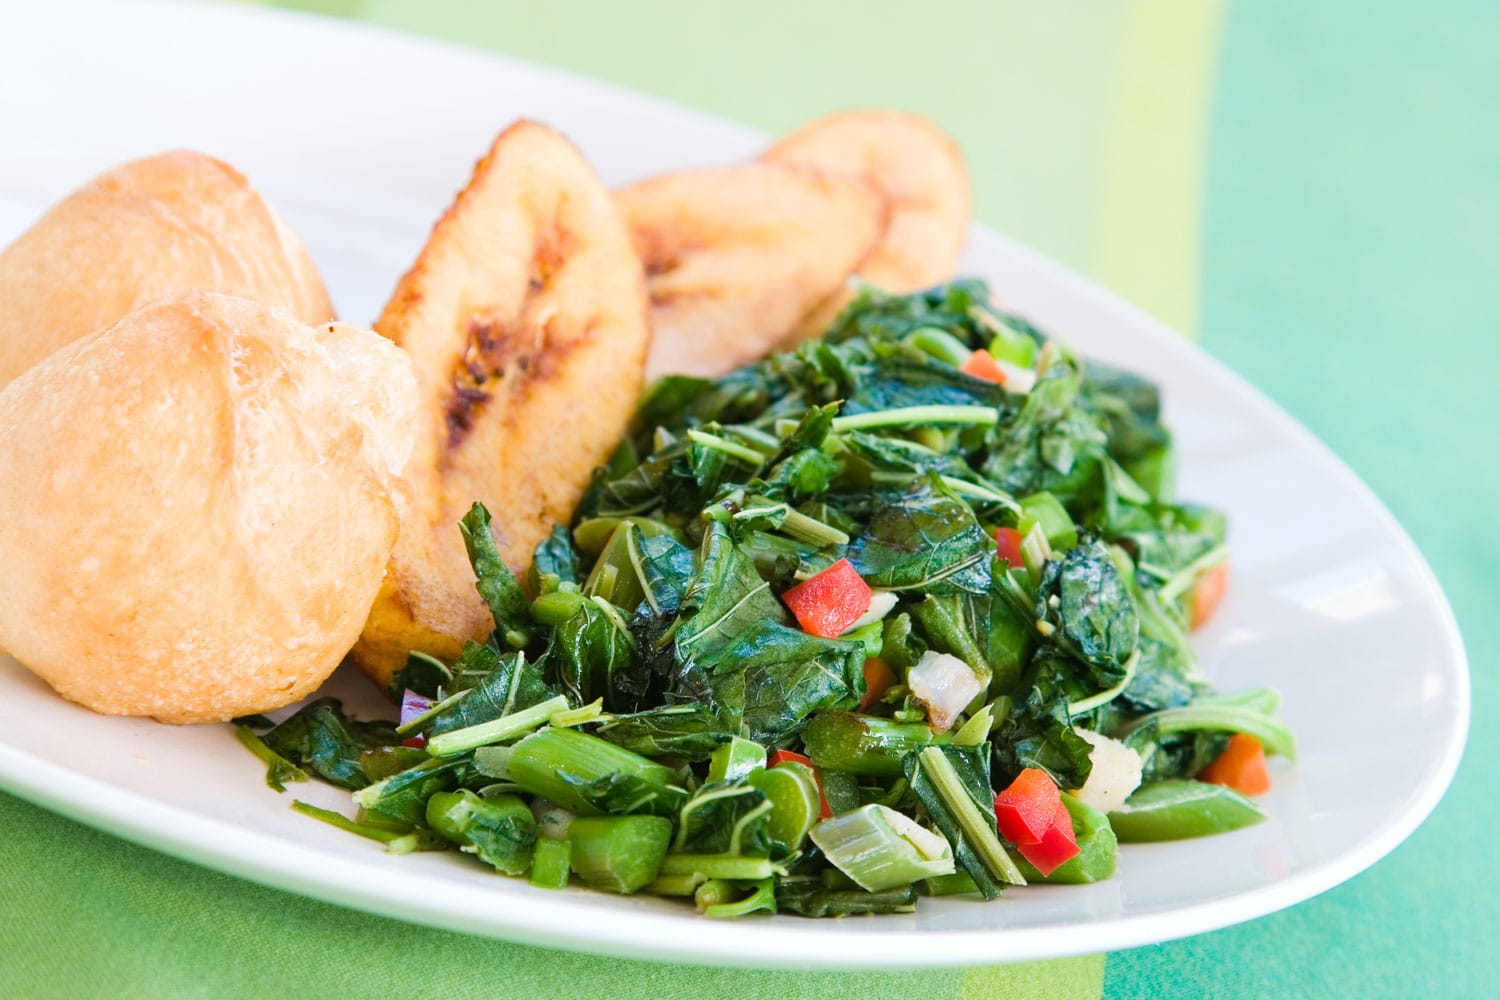 Speciality caribbean dish of callaloo (spinach) served with fried dumplings